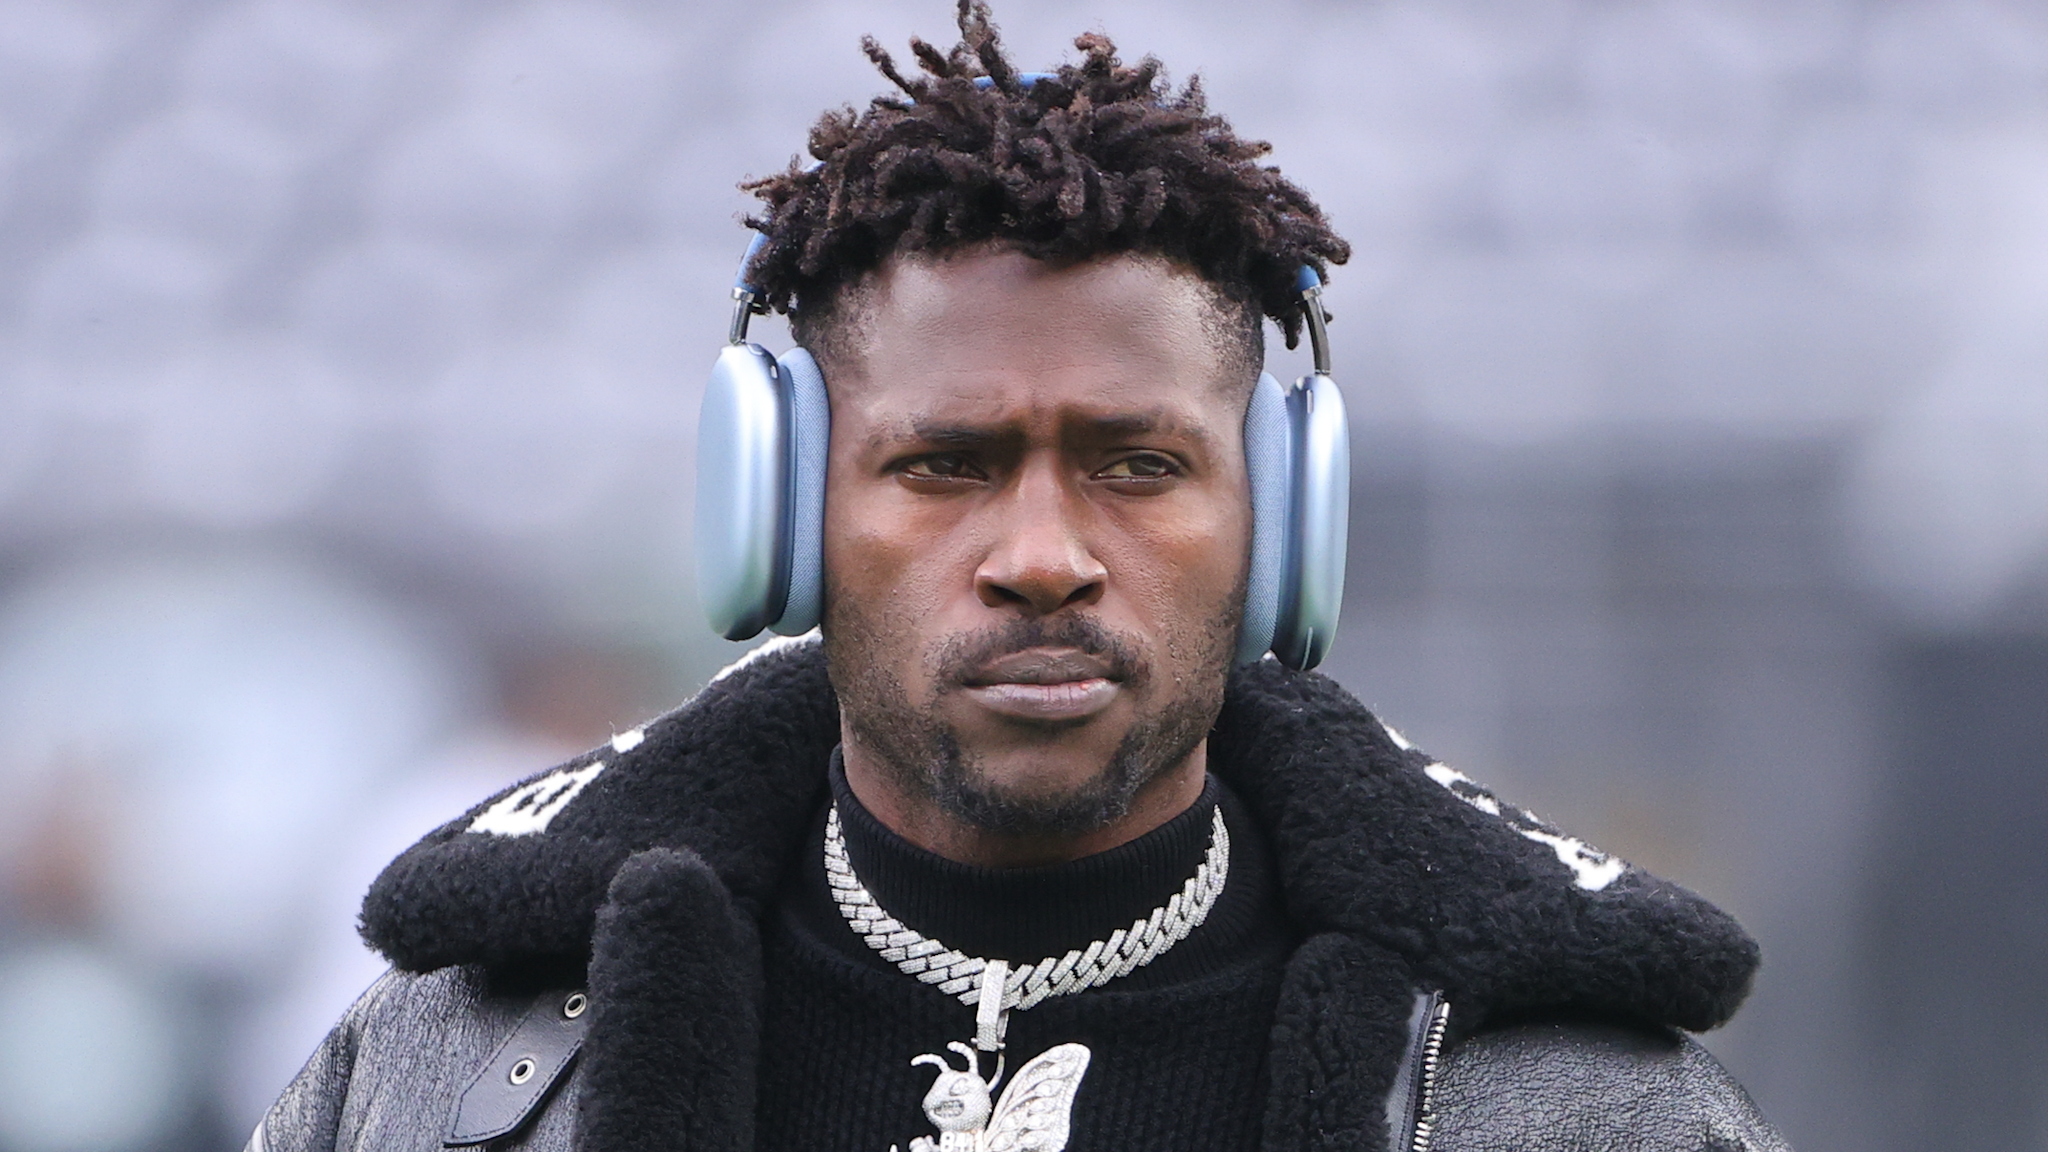 EAST RUTHERFORD, NJ - JANUARY 02: Tampa Bay Buccaneers wide receiver Antonio Brown (81) on the field in a Balenciaga jacket and a diamond Bee necklace prior to the National Football League game between the New York Jets and the Tampa Bay Buccaneers on January 2, 2022 at MetLife Stadium in East Rutherford, NJ.